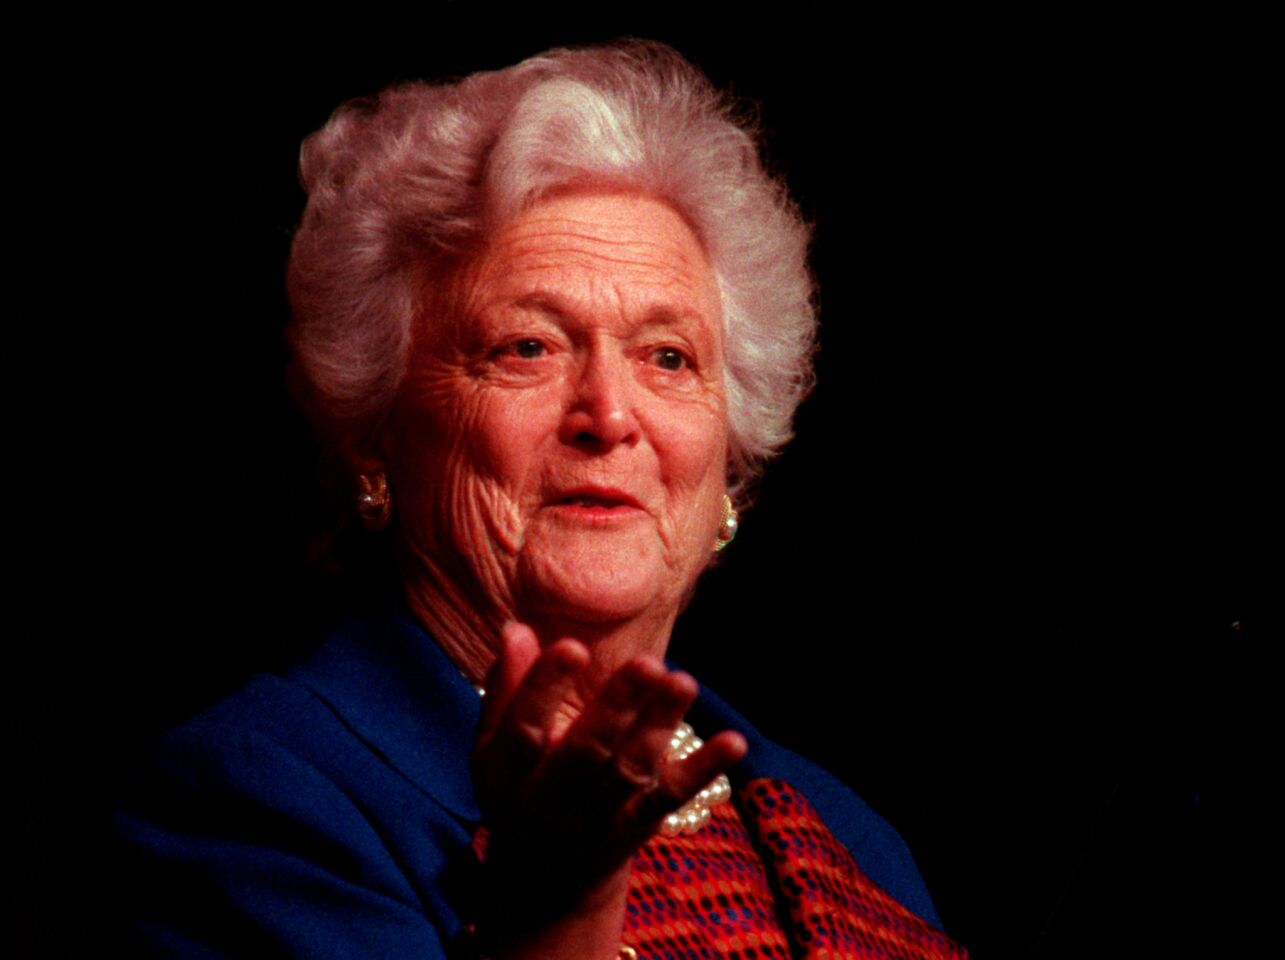 Former First Lady Barbara Bush gives a speech in 1996 at the California Credit Union League Convention at the Disneyland Hotel in Anaheim.